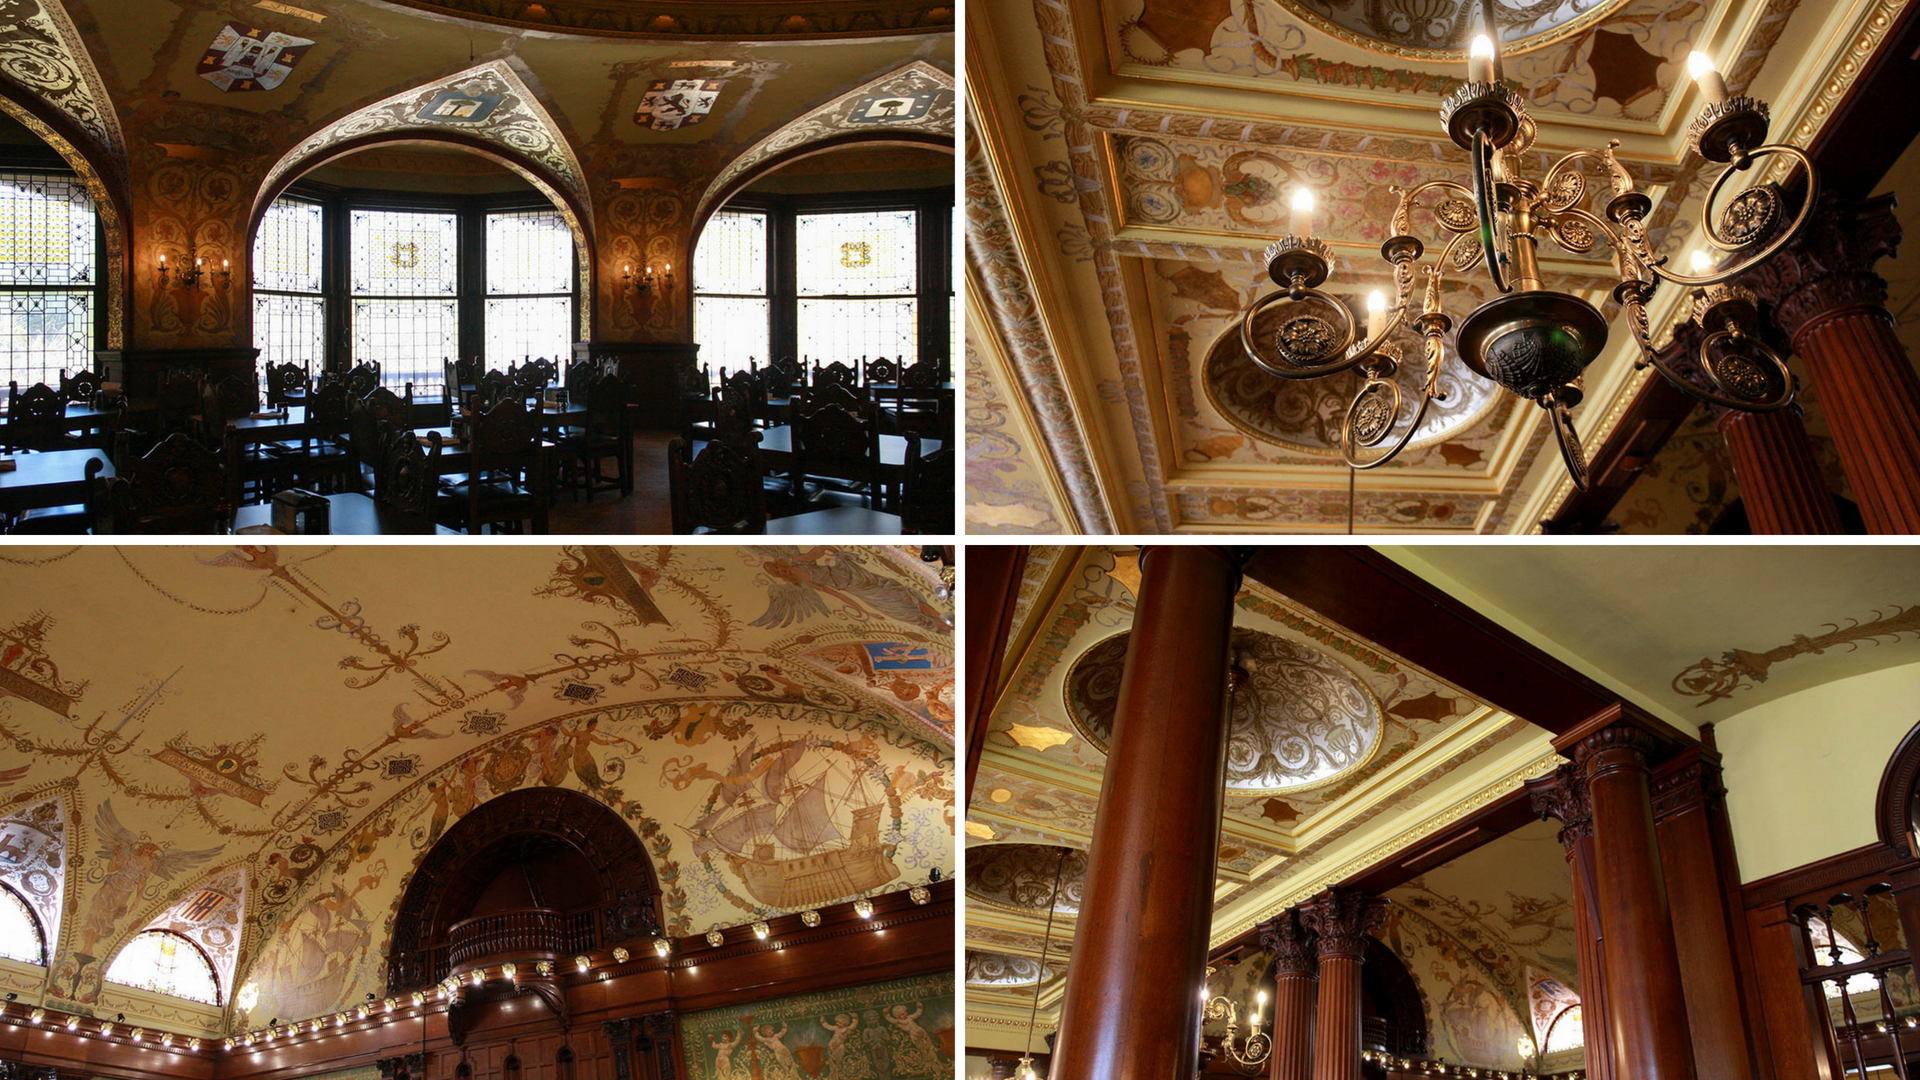 The ornate dining hall of Flagler College in St. Augustine